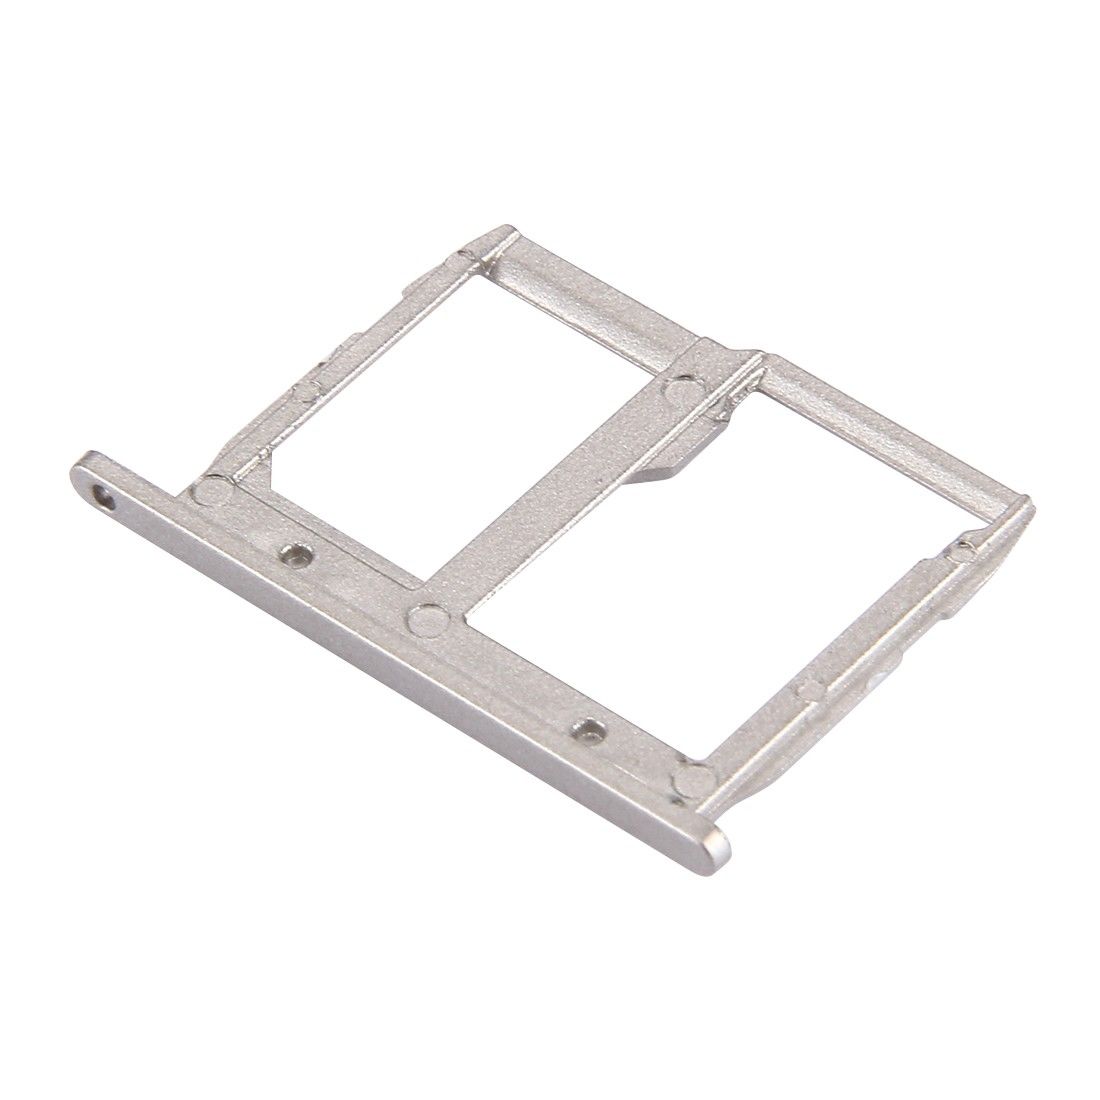 LG G5 Replacement MicroSD & Nano SIM Card Tray Holder - Grey for [product_price] - First Help Tech